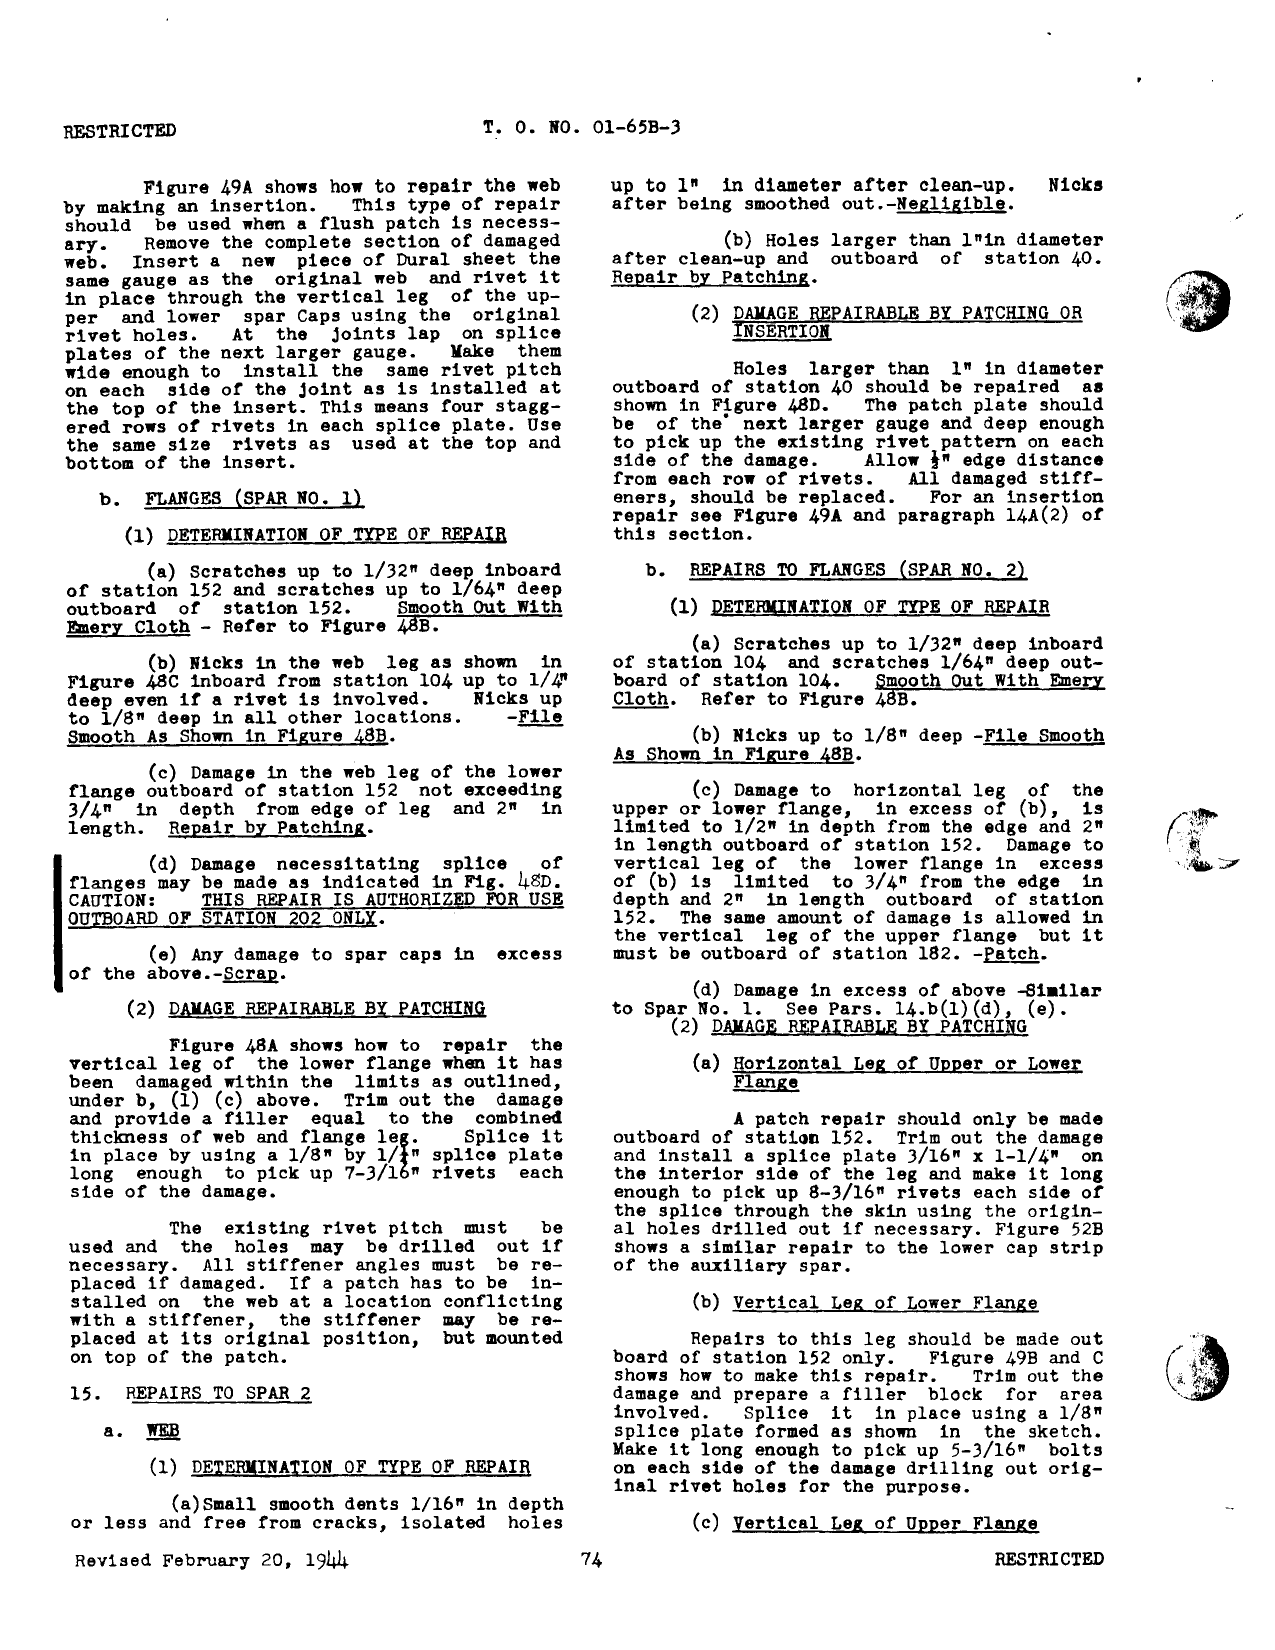 Sample page 86 from AirCorps Library document: Structural Repair Instructions - P-47